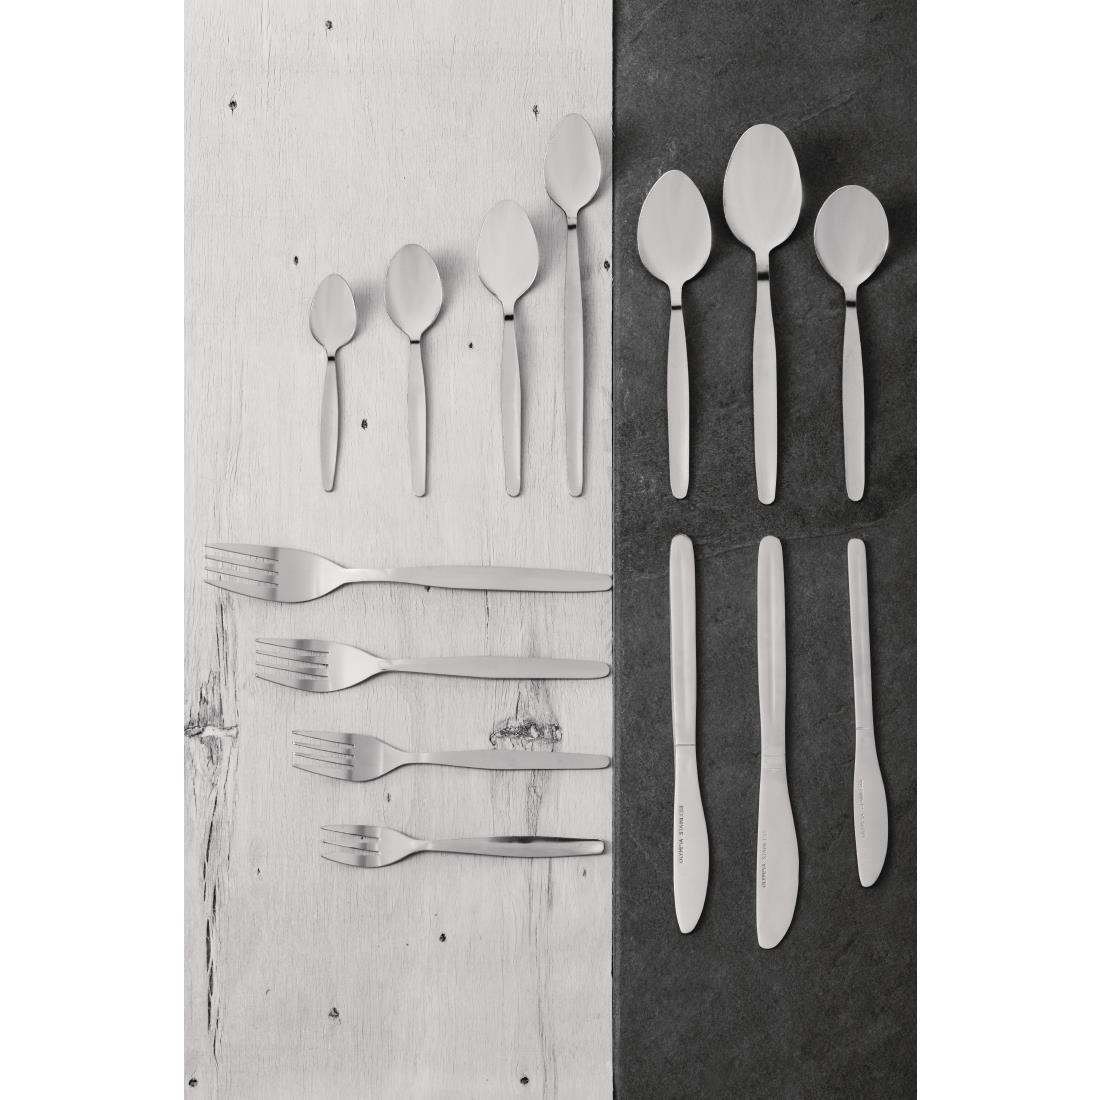 Olympia Kelso Childrens Spoon (Pack of 12) - CB066  - 2